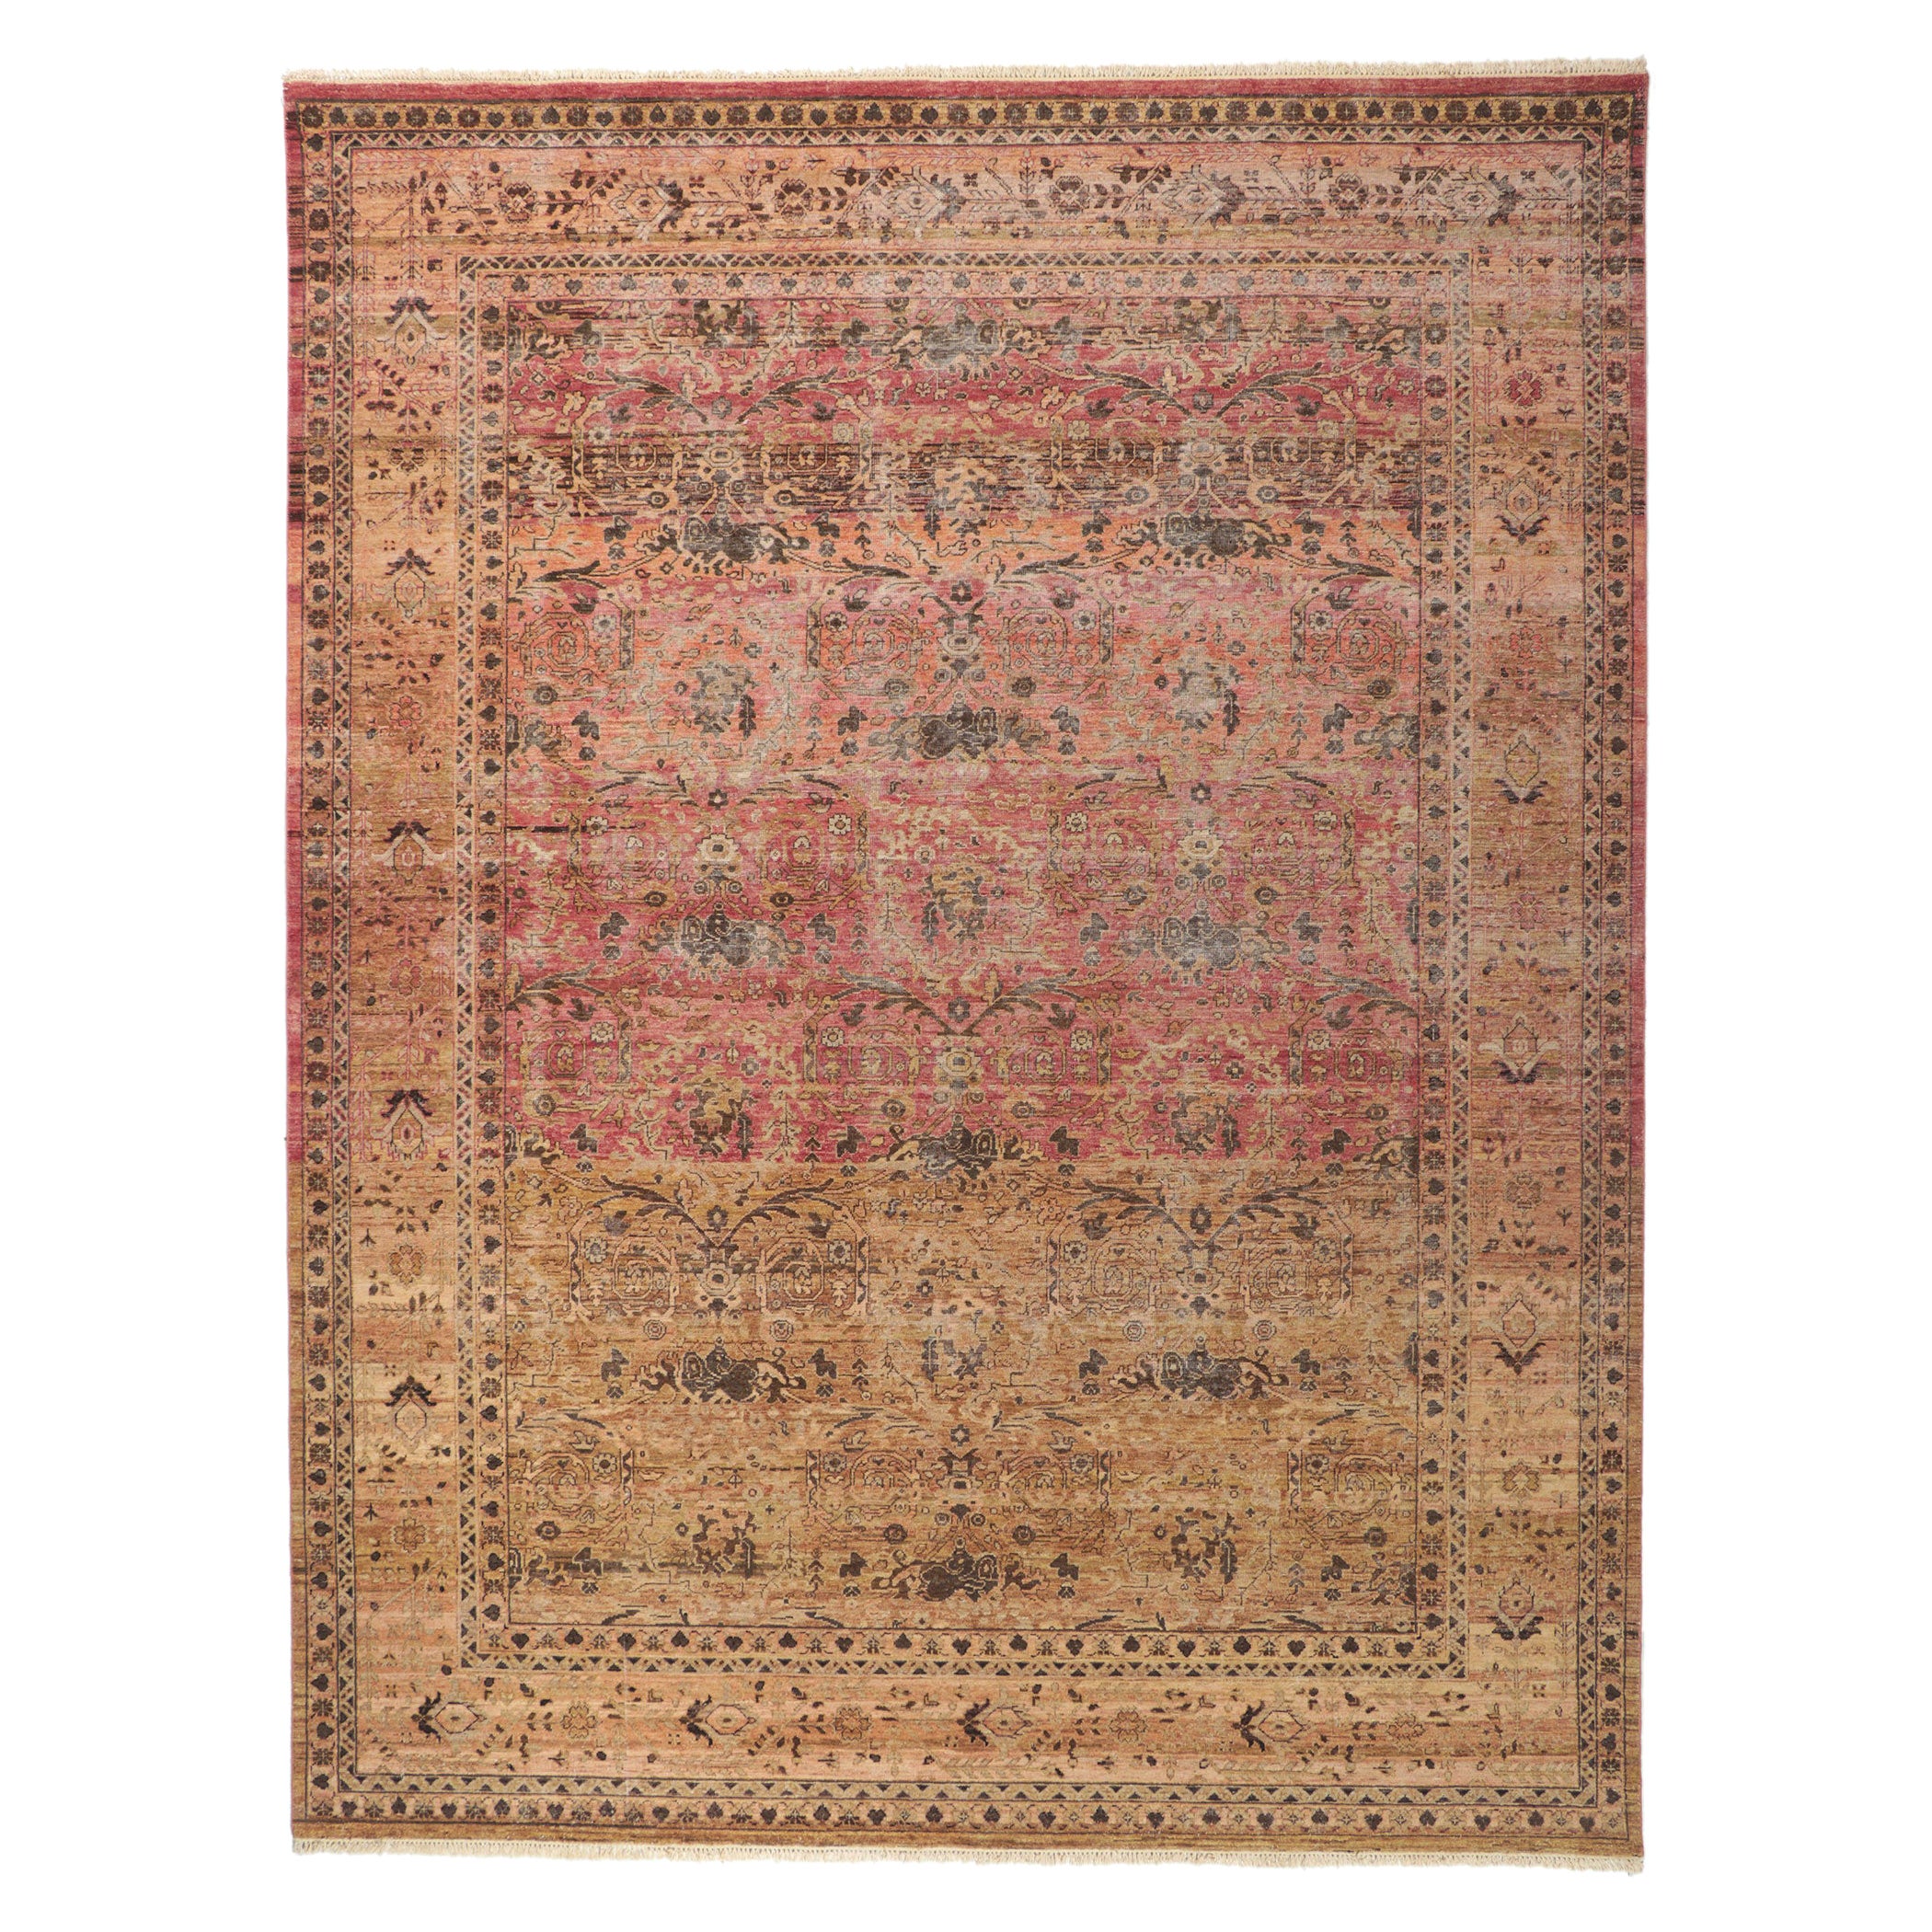 New Vintage-Style Distressed Rug with Rustic Earth-Tone Colors